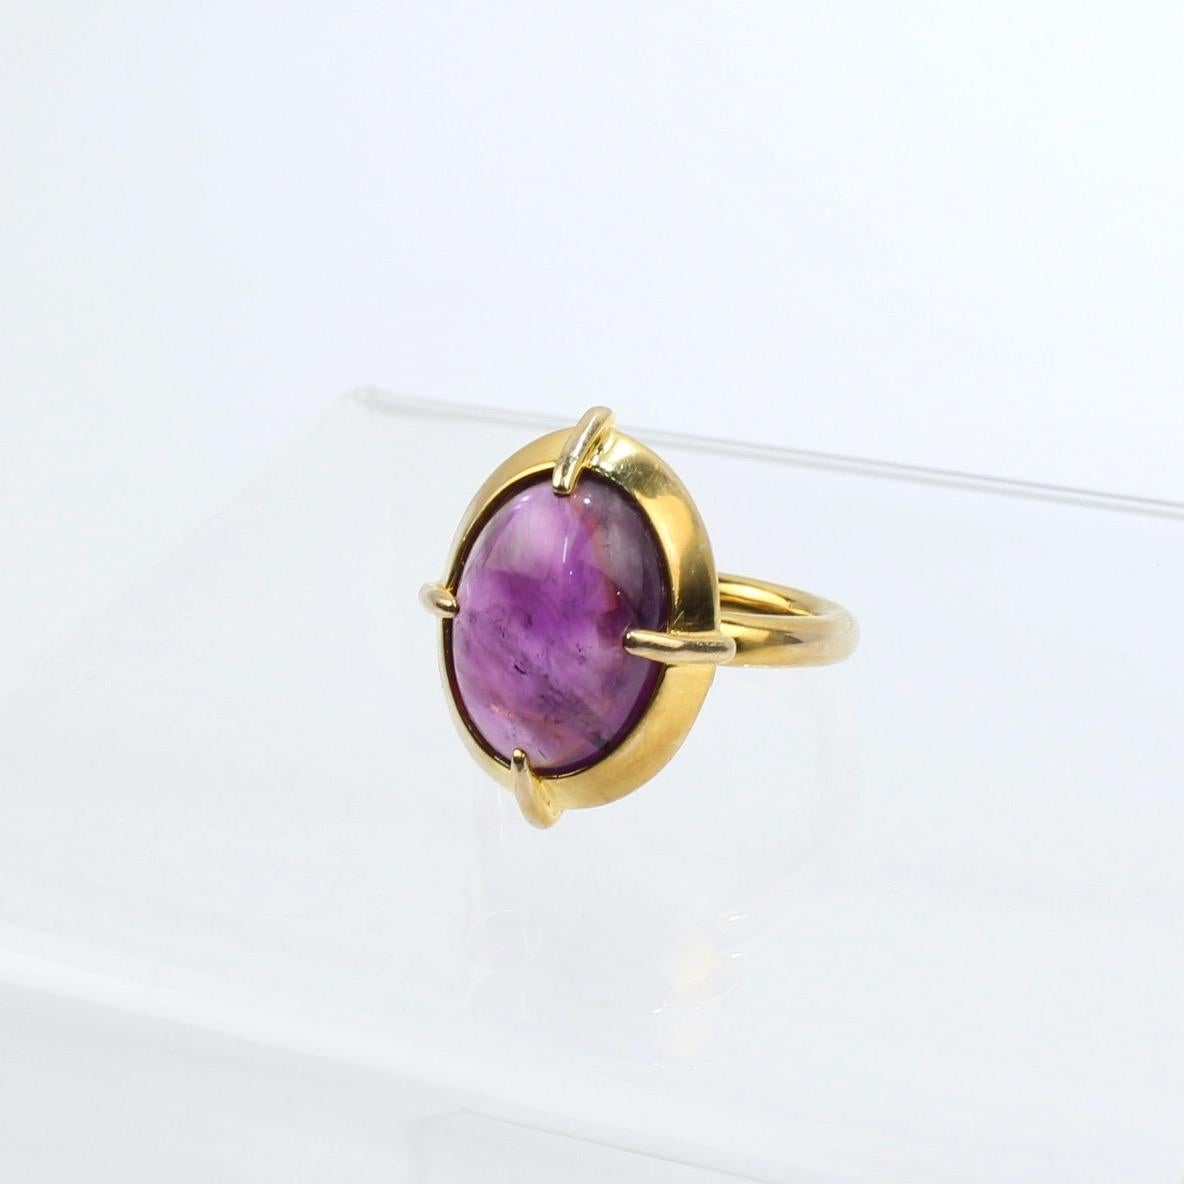 A very fine 14k gold and amethyst Bishop's ring.

With a large oval amethyst cabochon prong set in 14 karat gold. 

The ring's shank is a thick round band that mirrors the broad edge of the setting.  

The historical Byzantine design is based on a